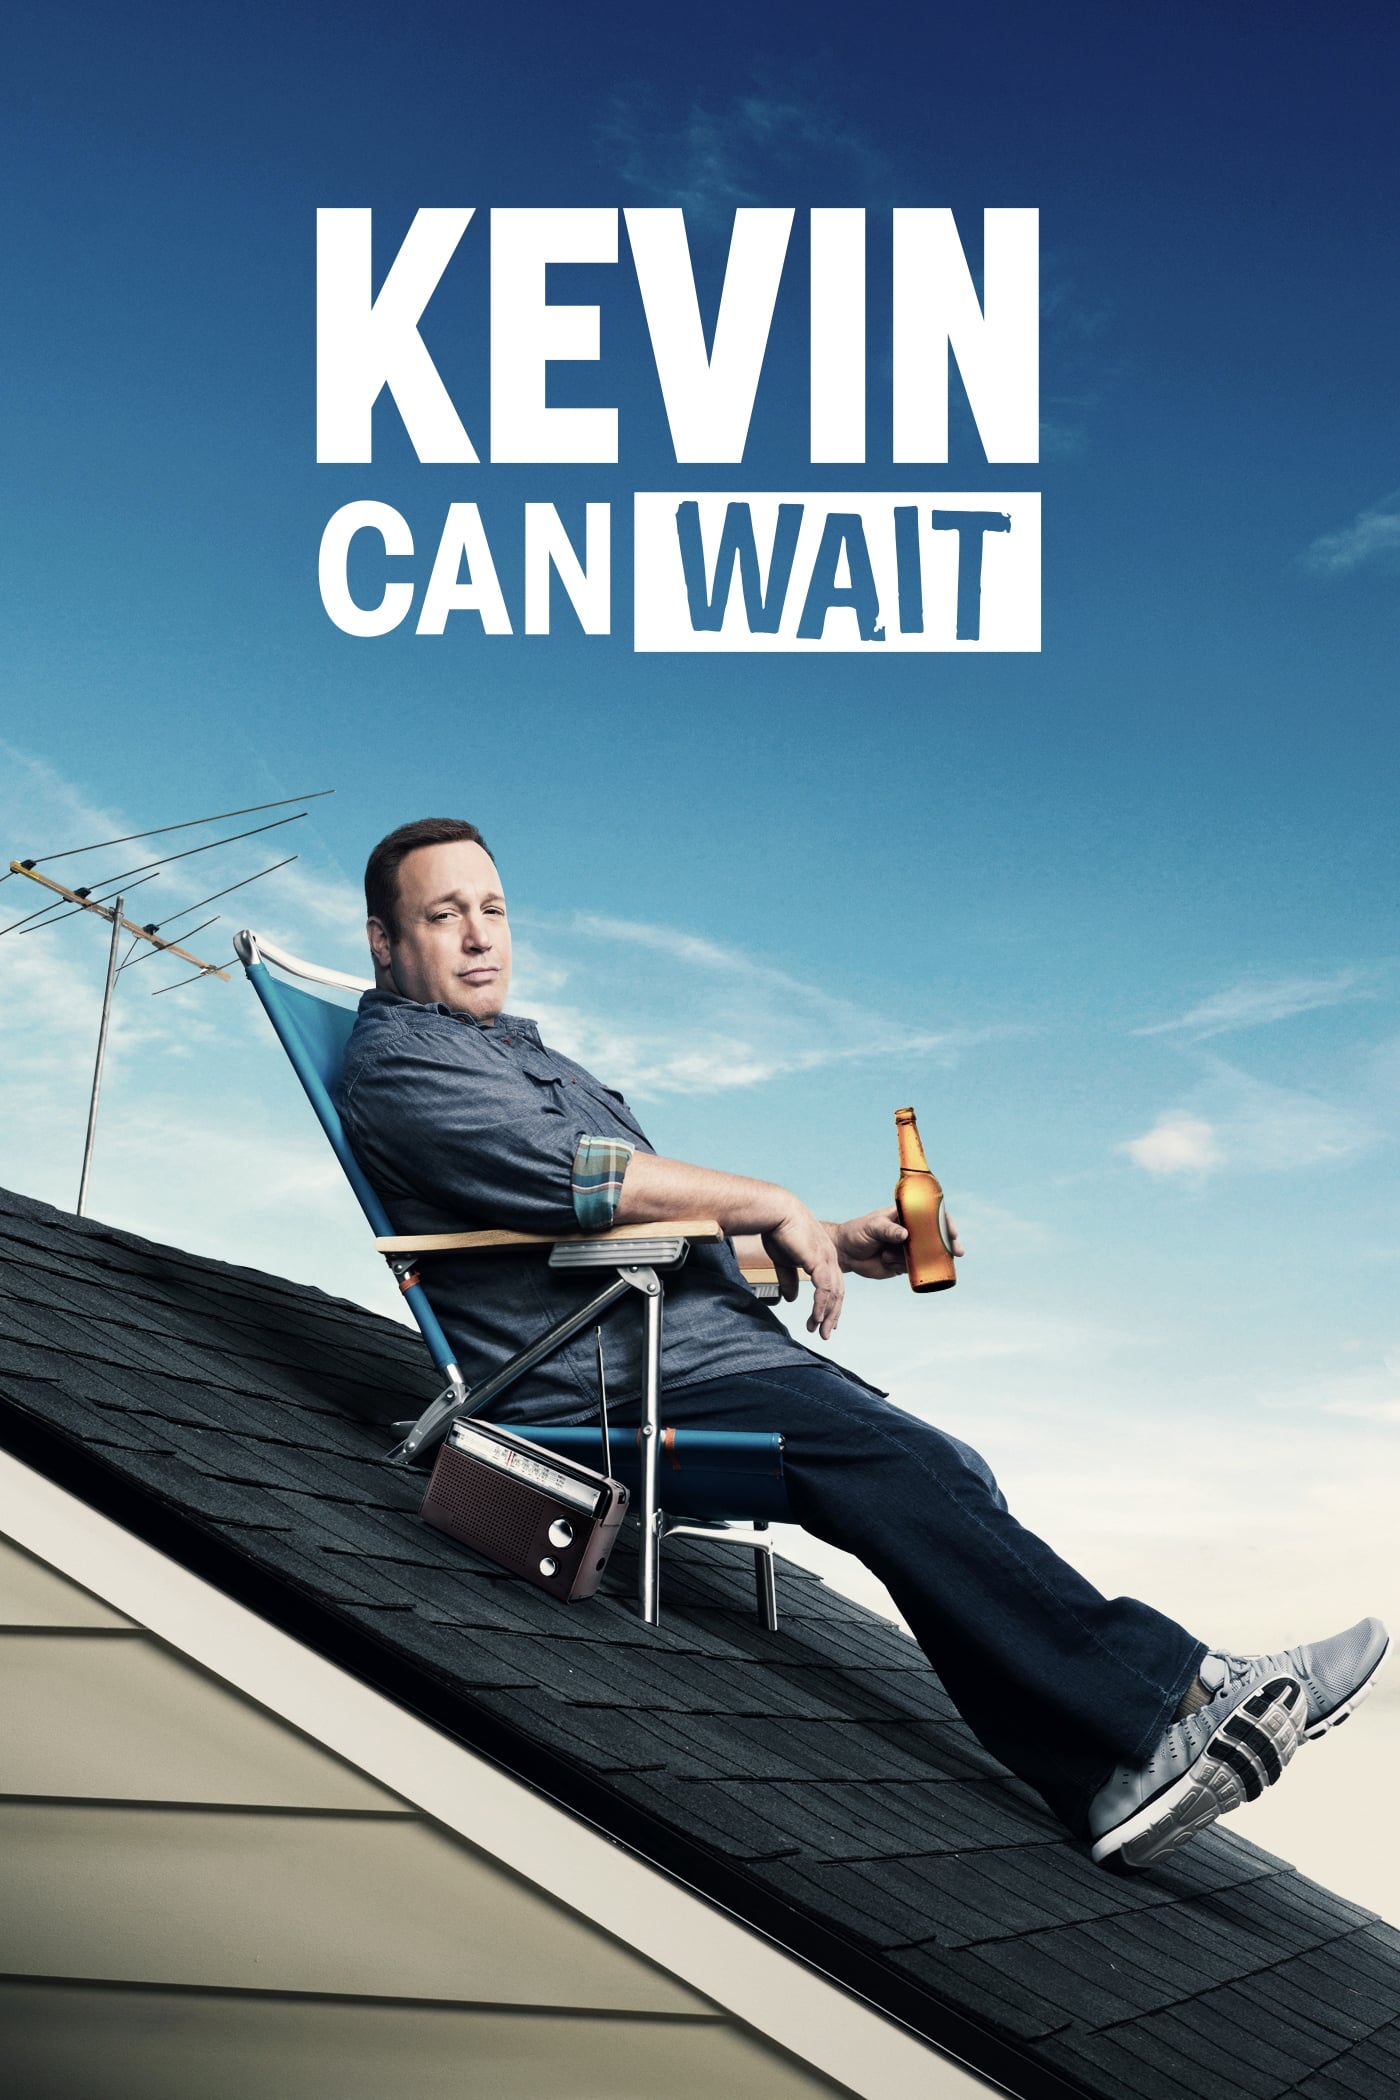 Kevin Can Wait (2016)